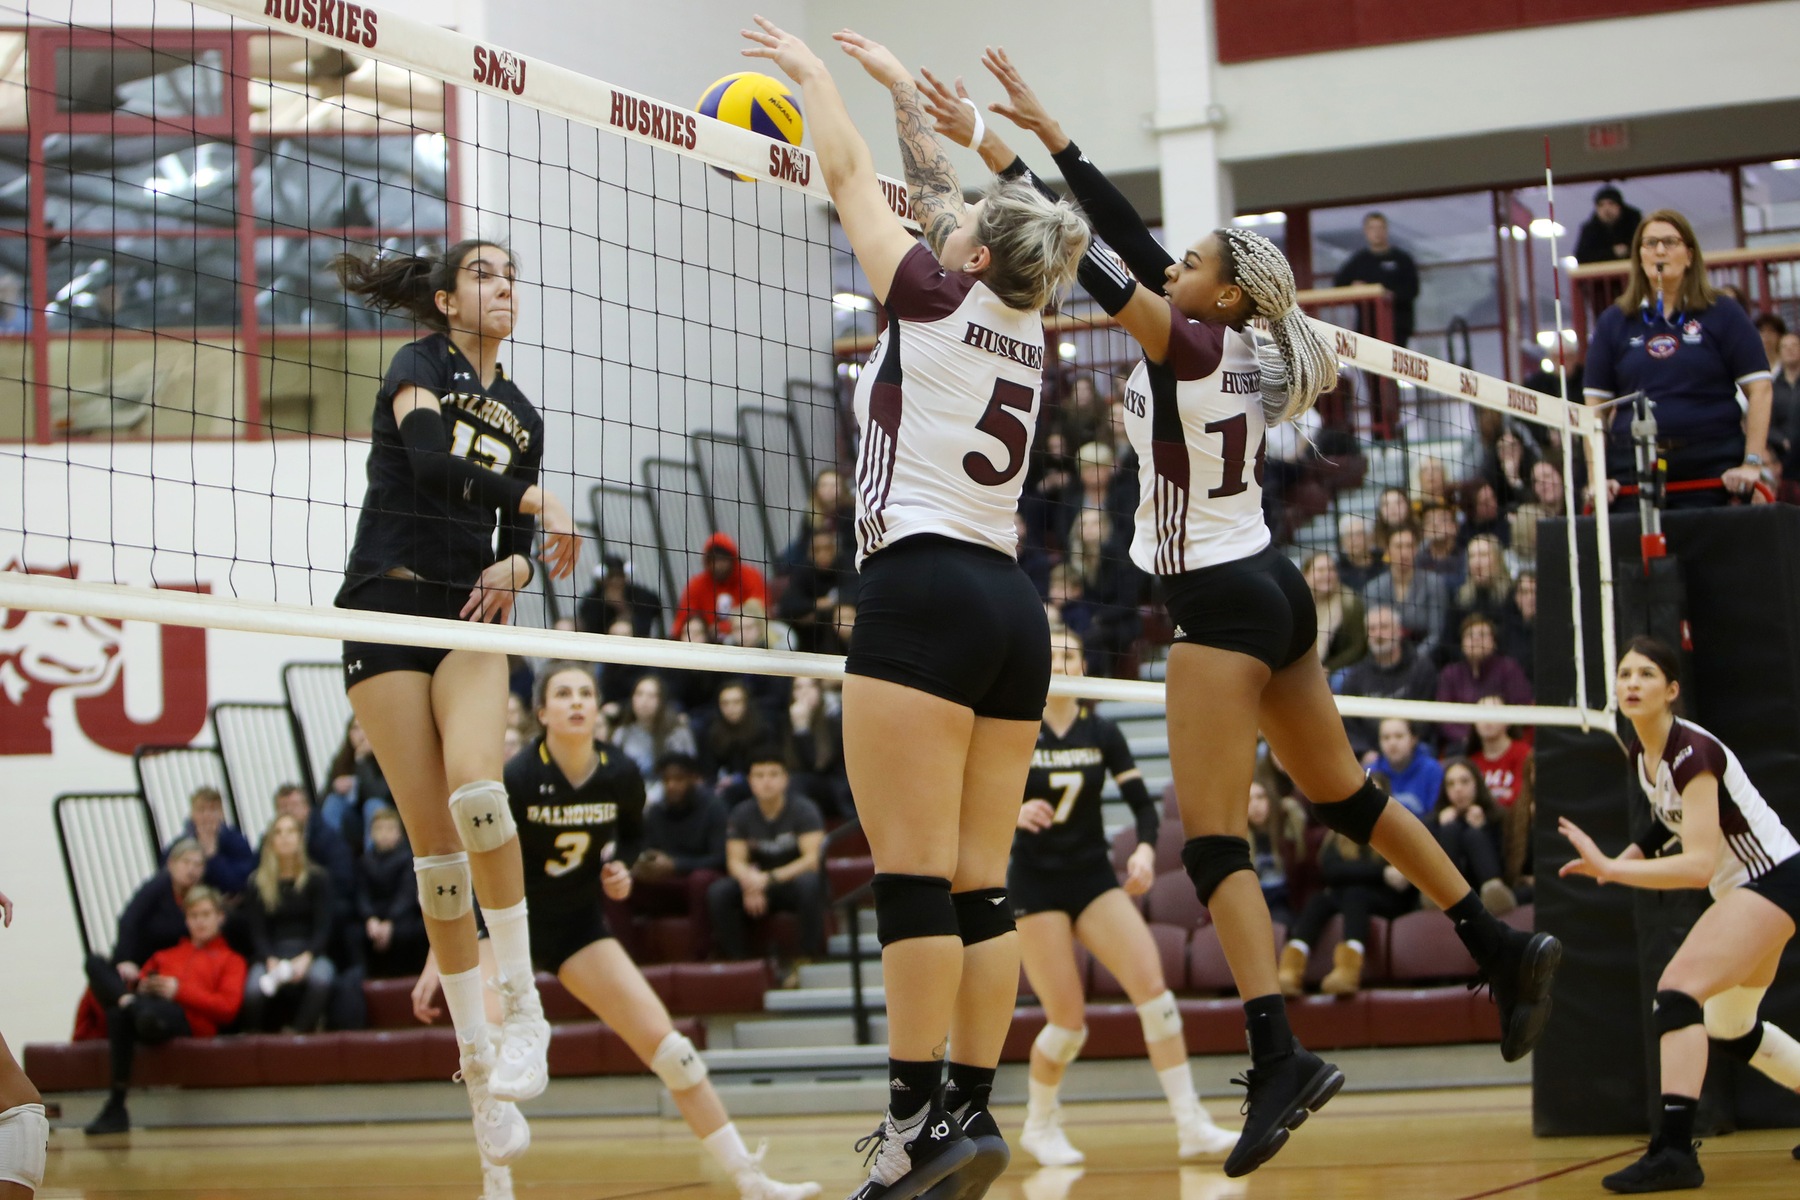 Tigers top Huskies 3-0 in volleyball action